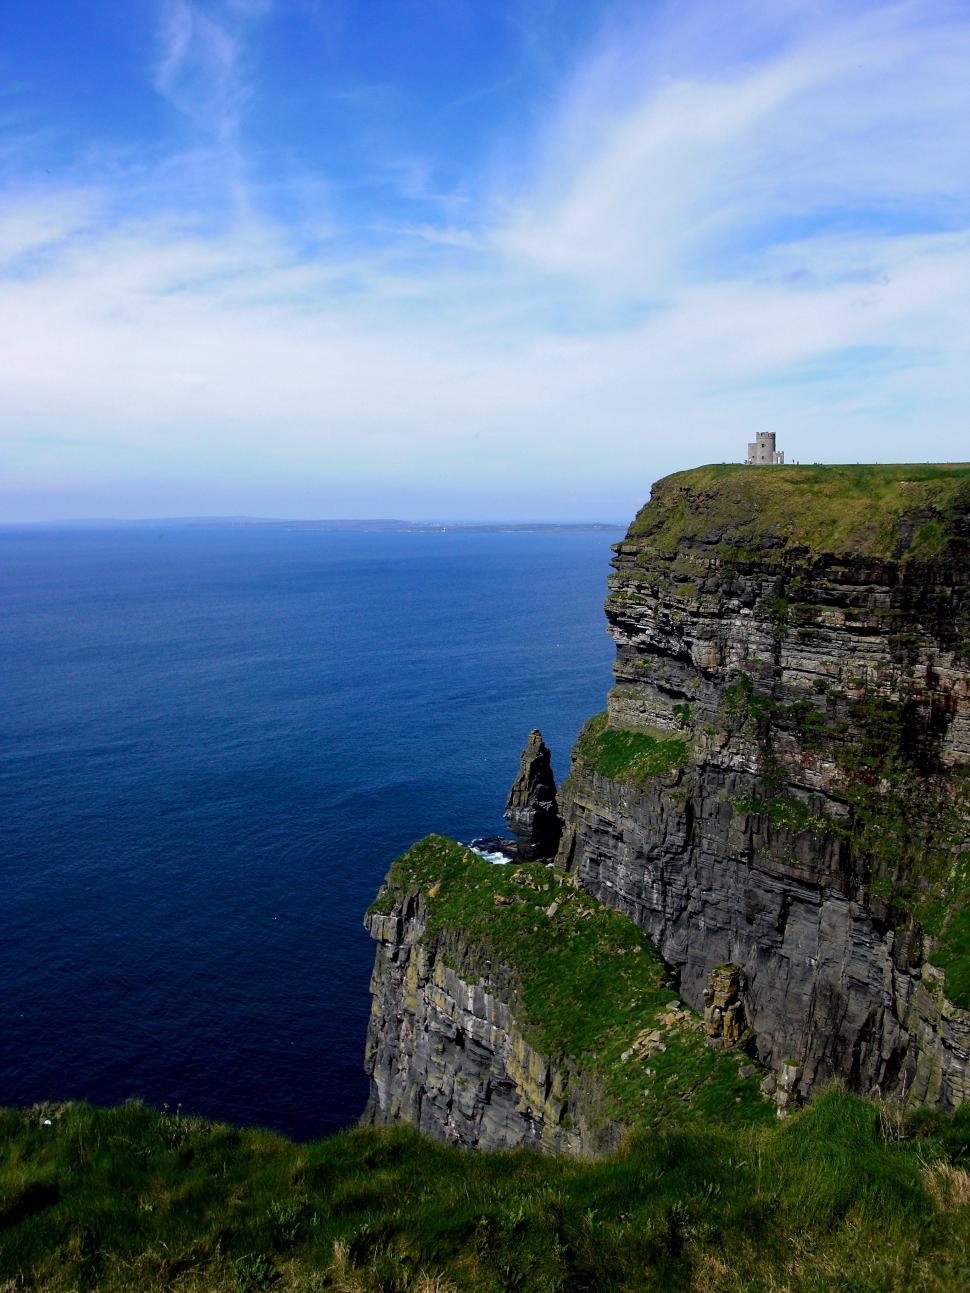 Free Image of Tower on Cliff Overlooking Ocean 